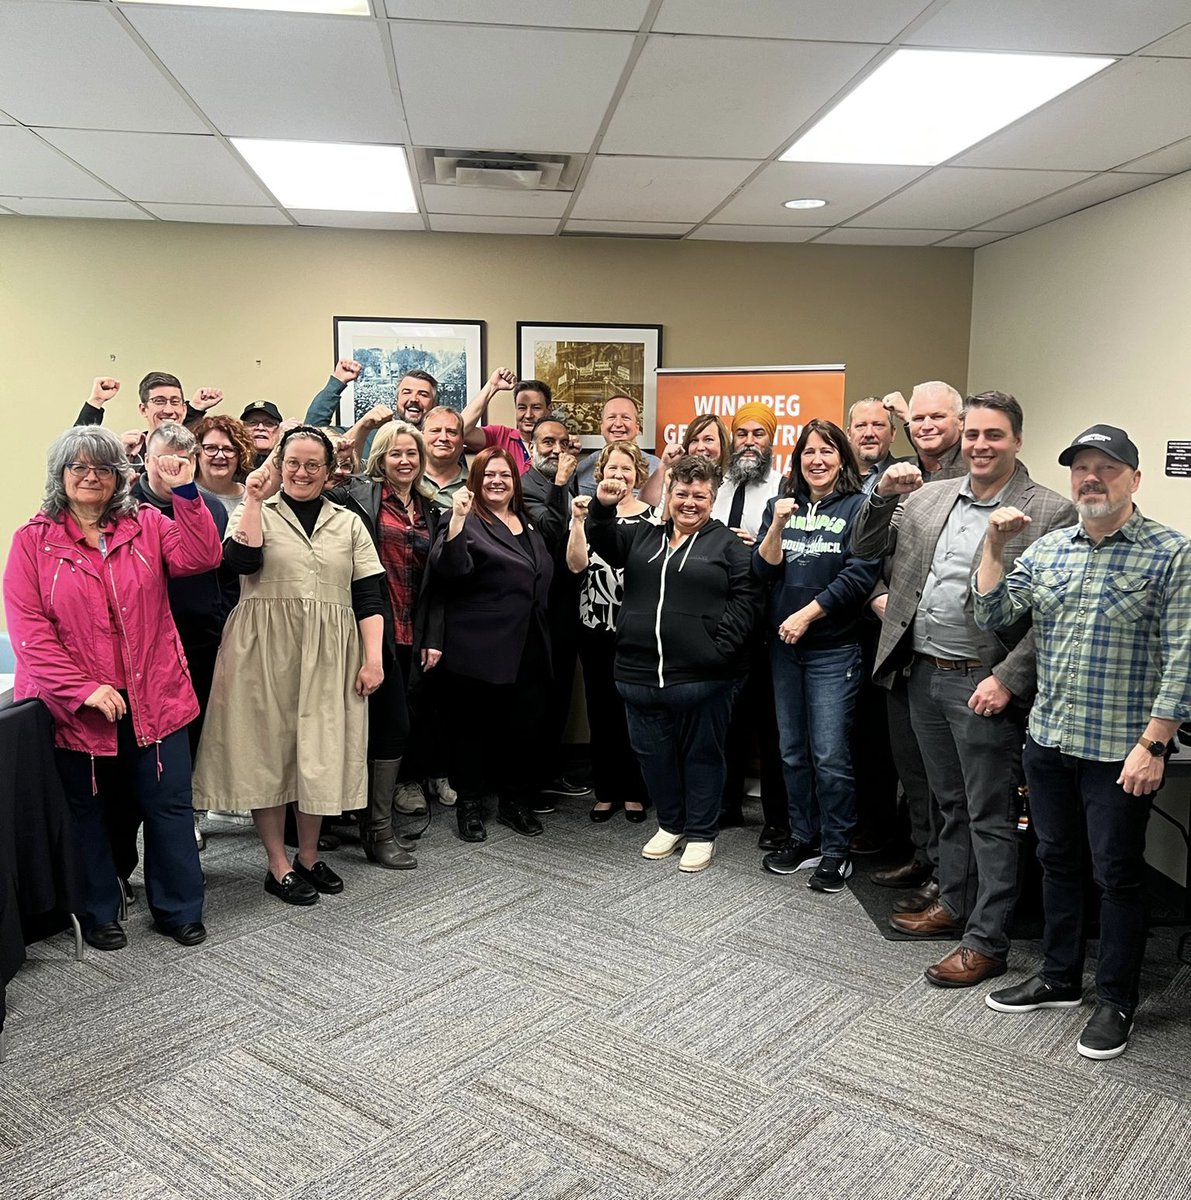 Anti-scab legislation means that workers have the power to demand better wages and working conditions. It means more power for you and less for the big bosses. Today, I met with the Manitoba Federation of Labour - more than 100 years after the Winnipeg General Strike. With